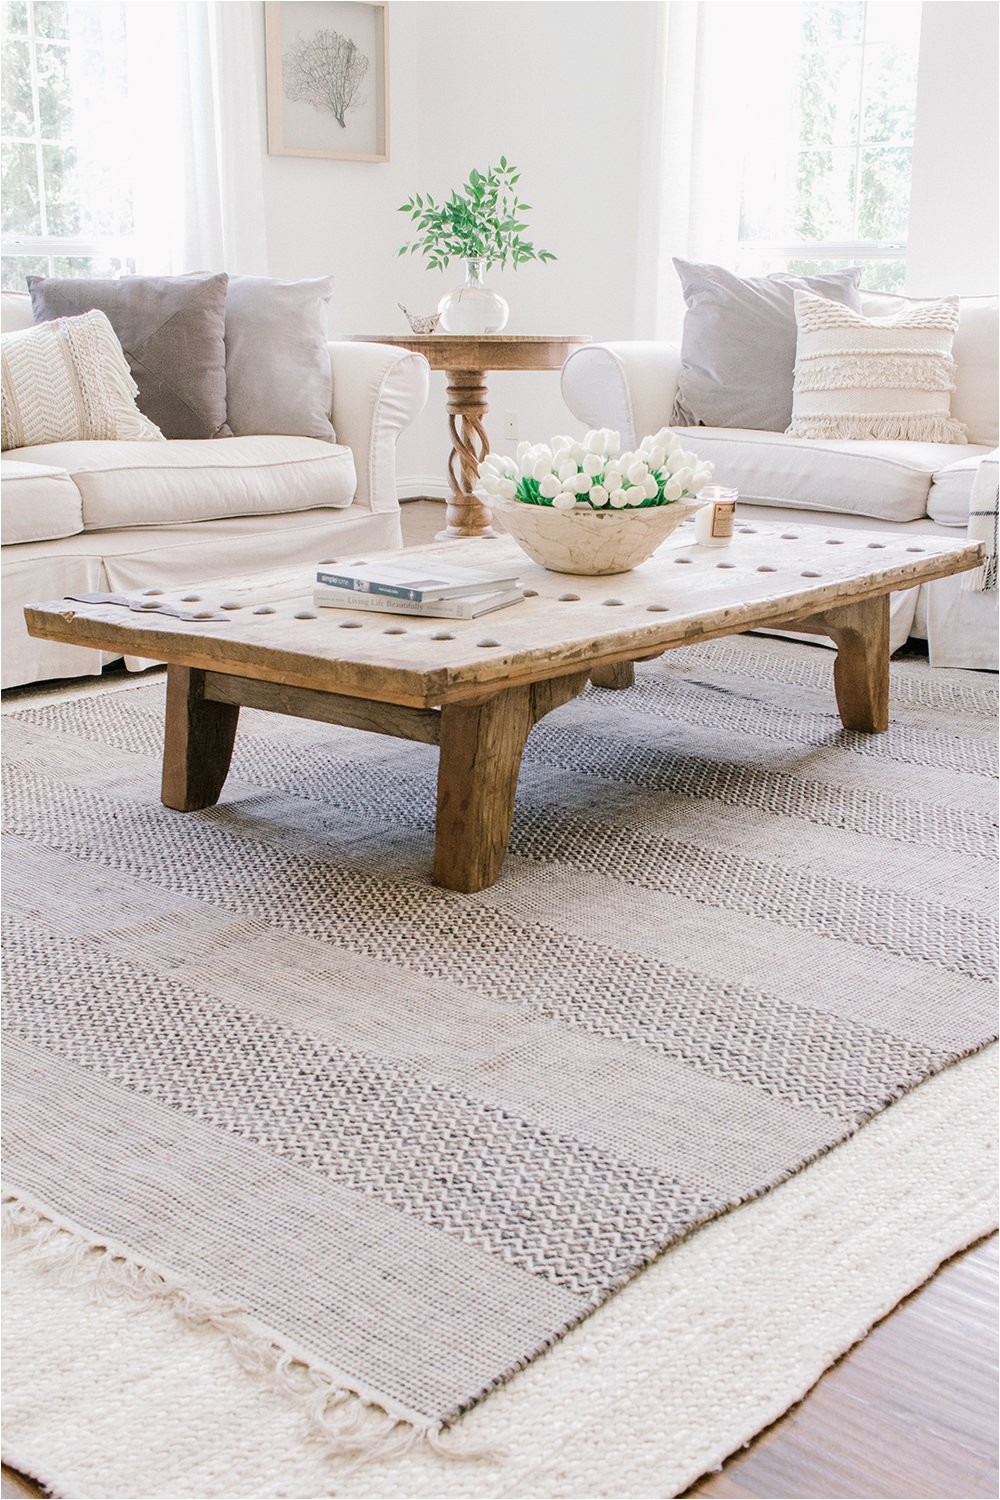 Area Rug Under Coffee Table Design Trend Layered Rugs — Farmhouse Living